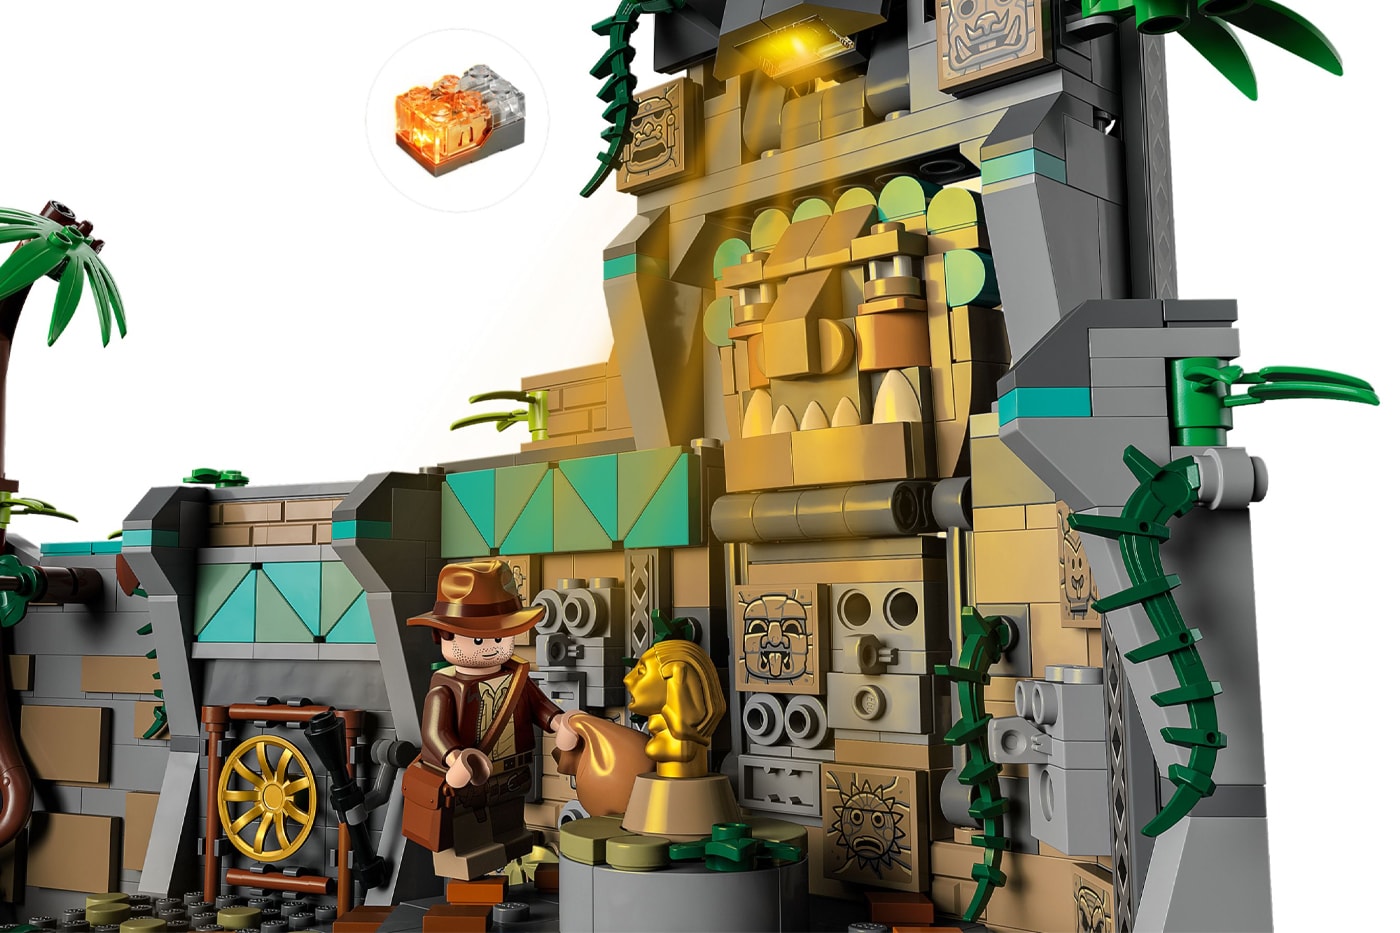 LEGO indiana Jones Temple of the Golden Idol  Escape from the Lost Tomb Fighter Plane Chase 77012 77015 77013 release info